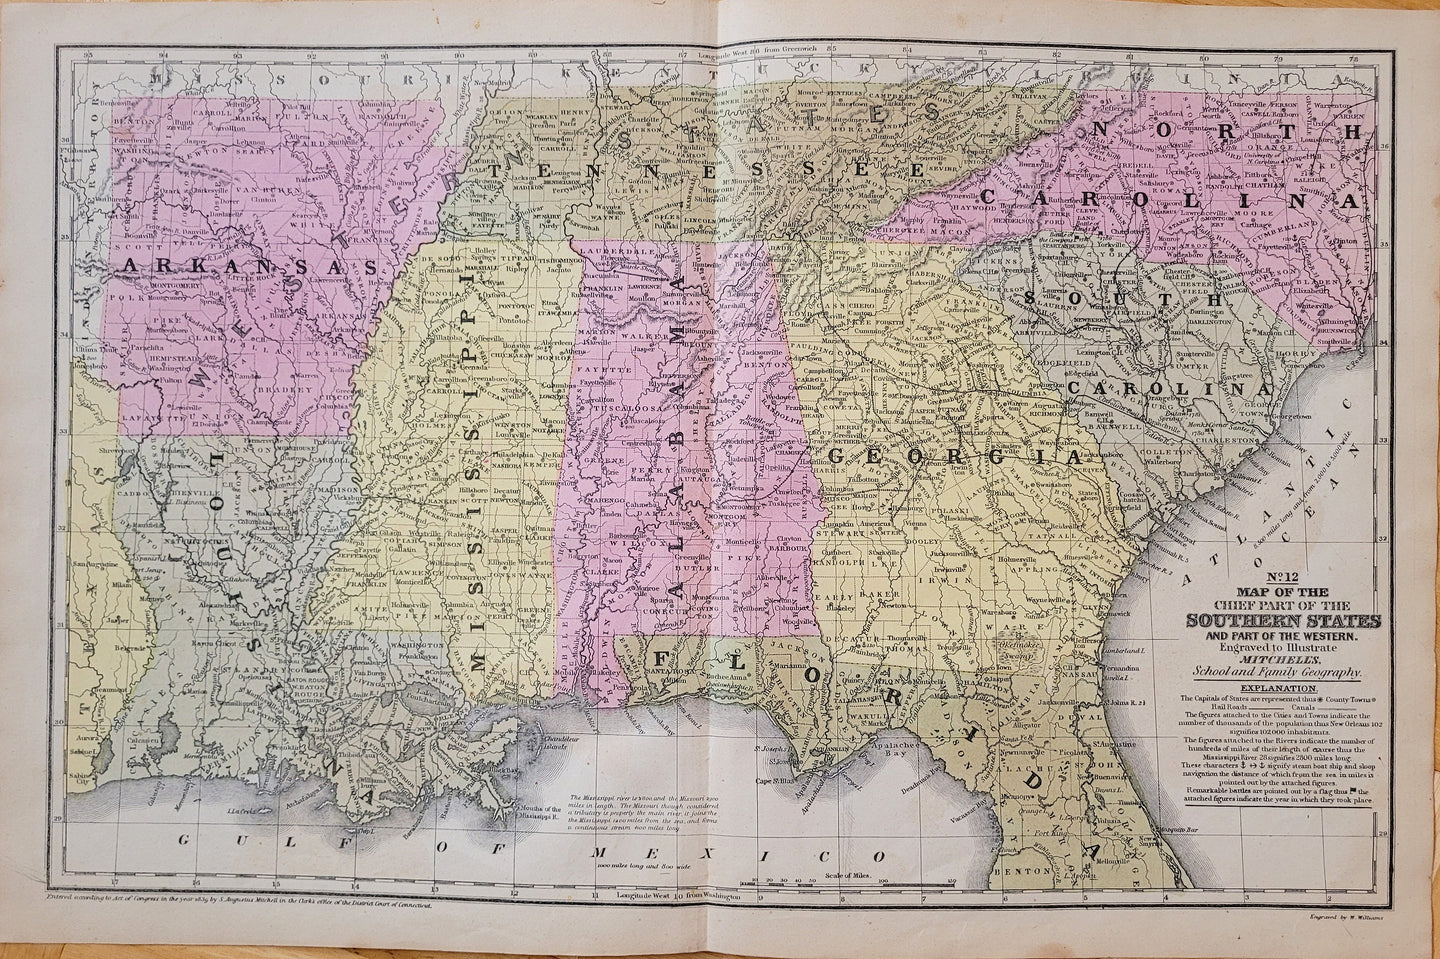 Antique-Map-United-States-Chief-Part-Southern-States-United-States-South-Arkansas-Louisiana-Mississippi-Tennessee-Alabama-Georgia-North-Carolina-South-Carolina-Florida-Mitchell-Mitchell's-School-and-Family-Geography-1851-1850s-1800s-19th-Century-Maps-of-Antiquity